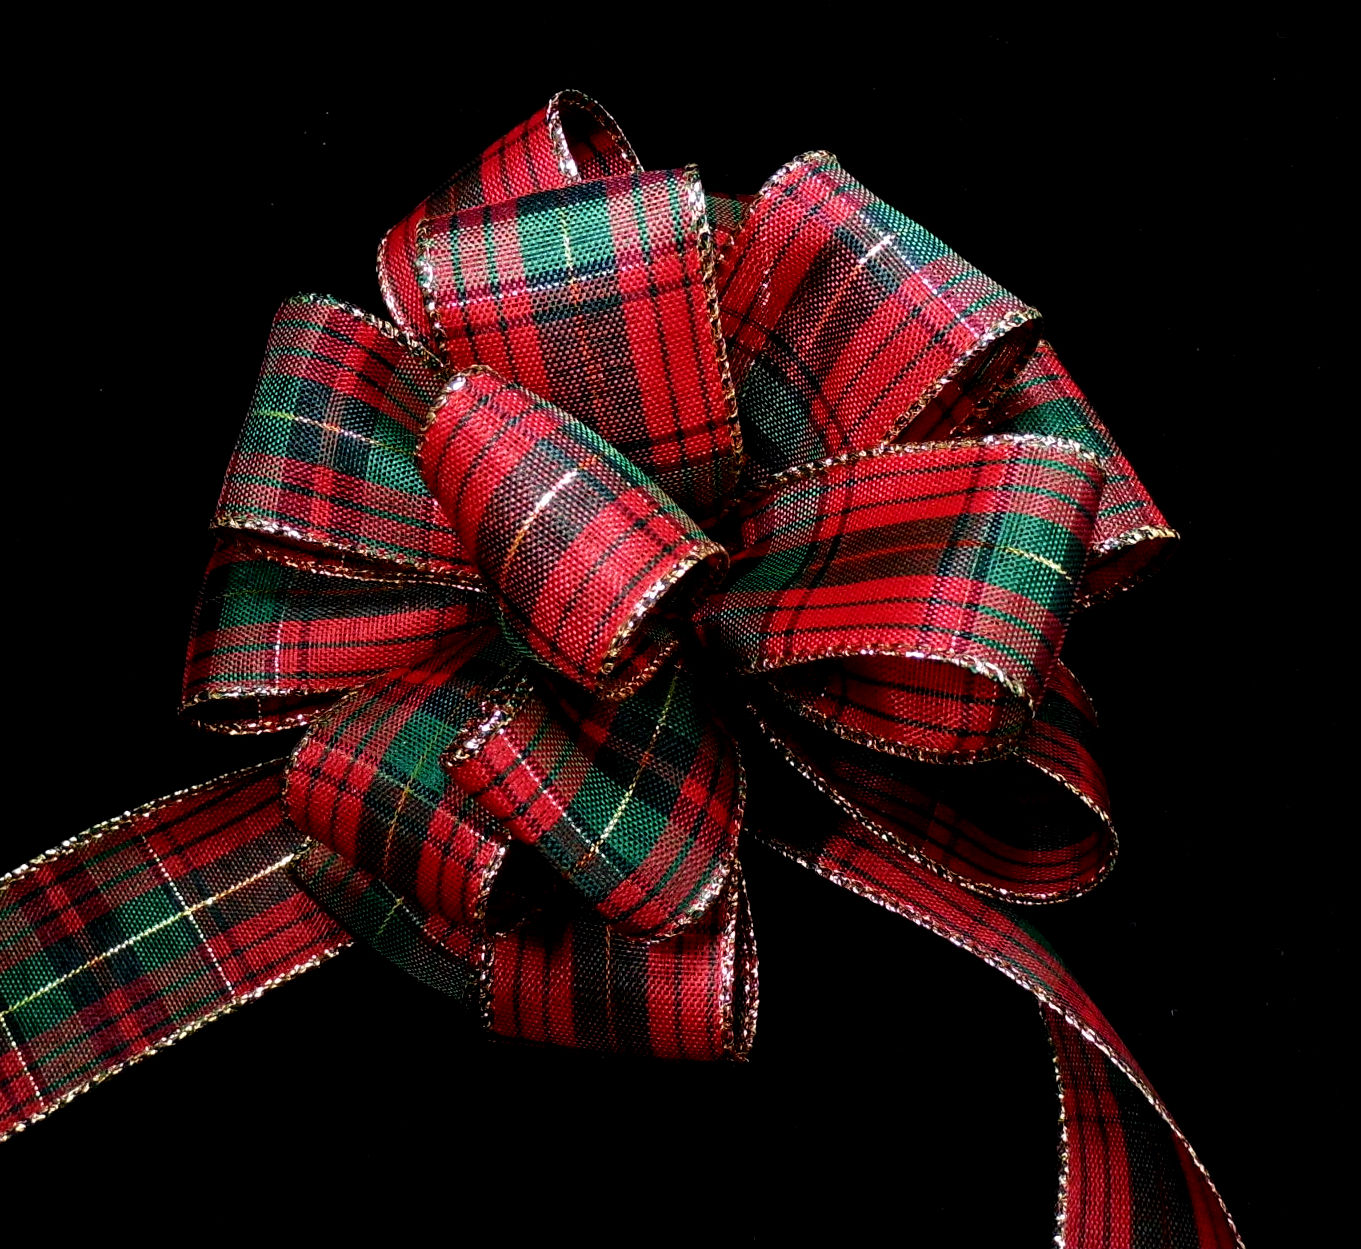 Wired Glitter Plaid Ribbon from American Ribbon Inc.